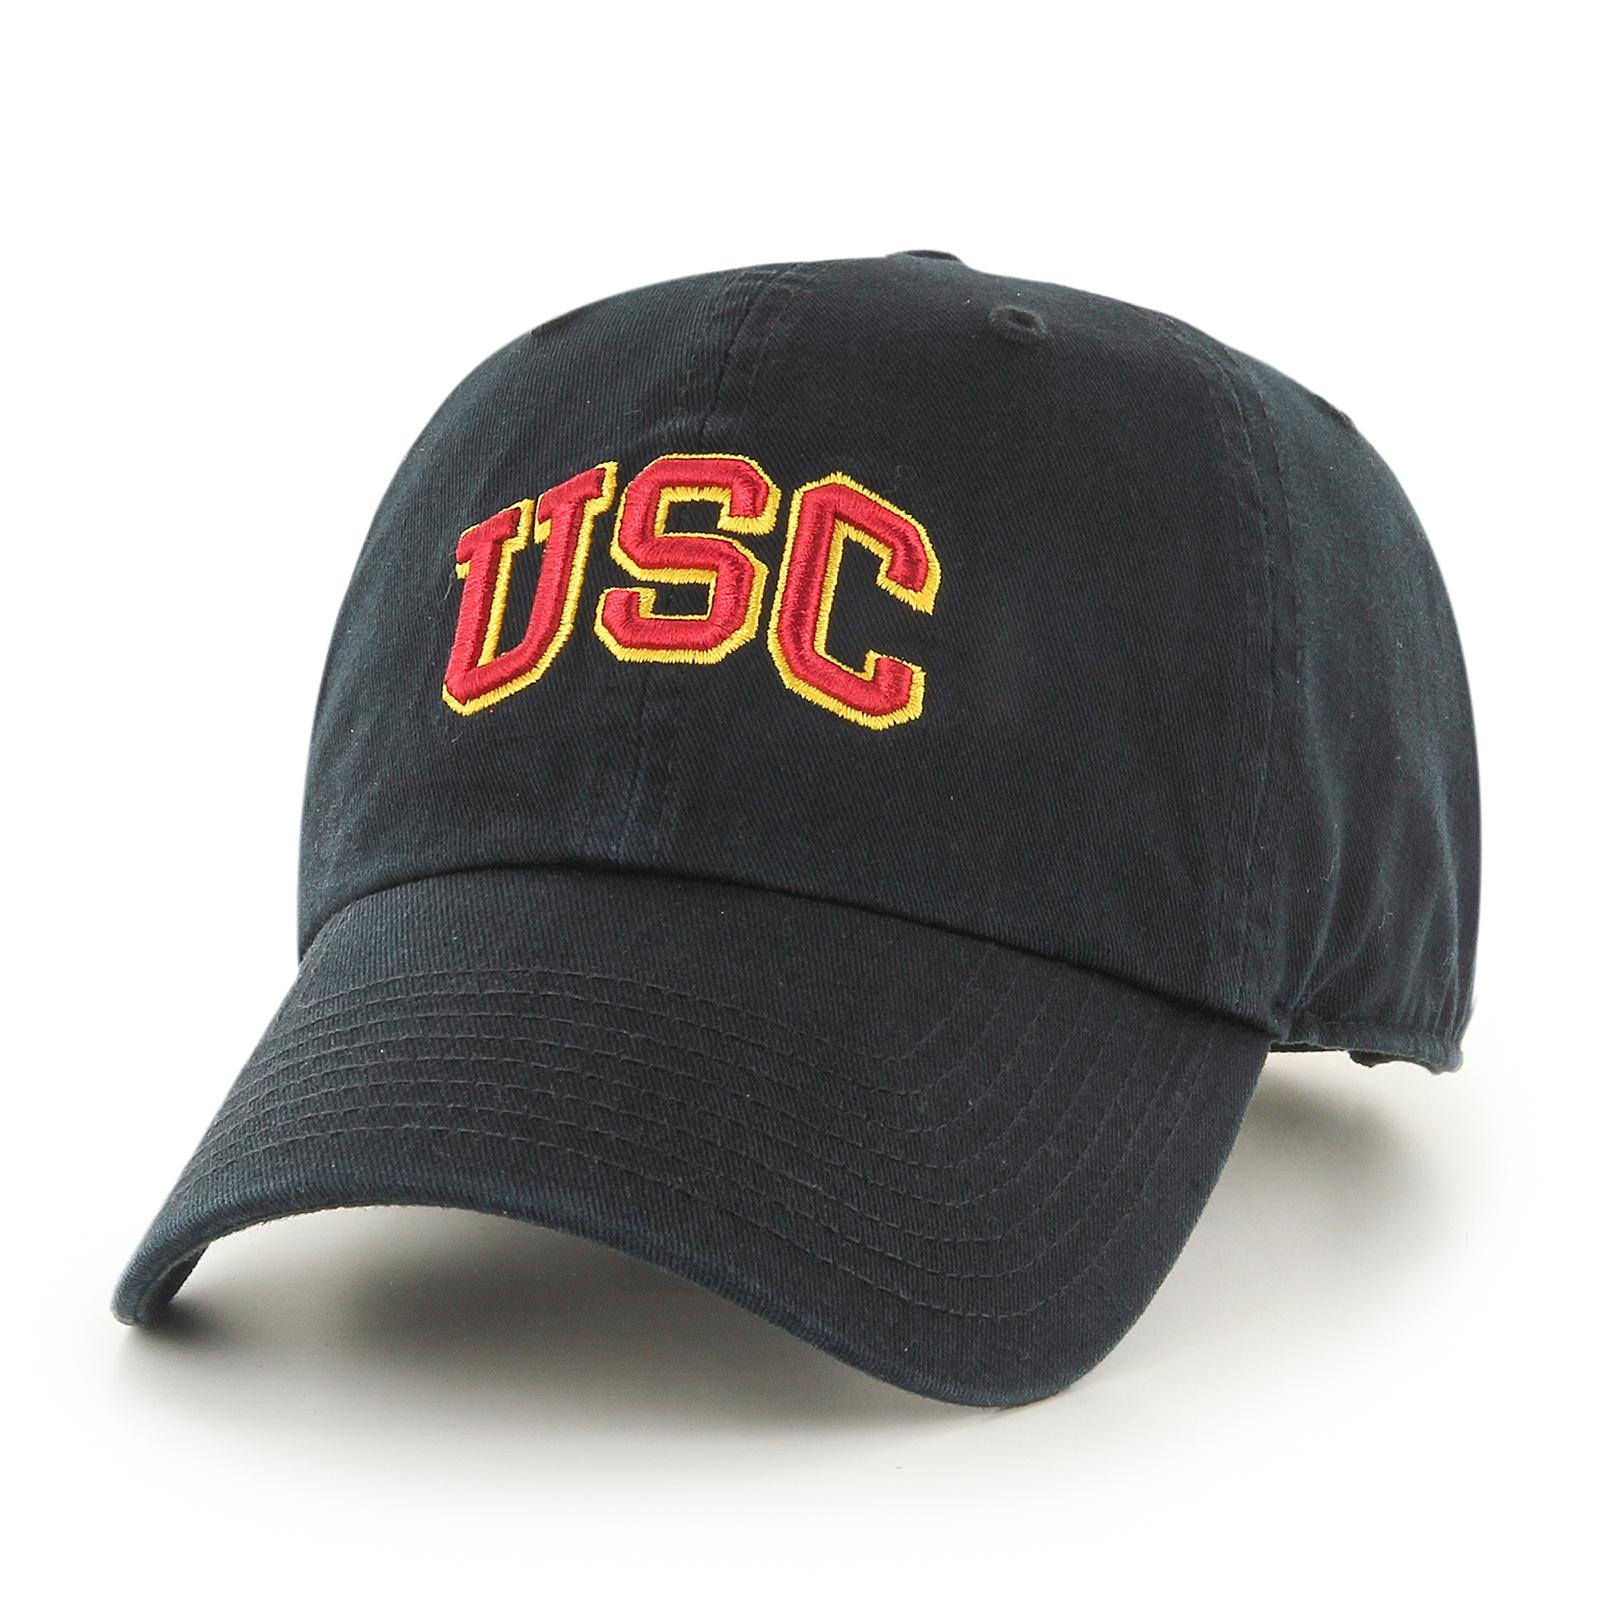 USC Arch Mens Clean Up Hat image31